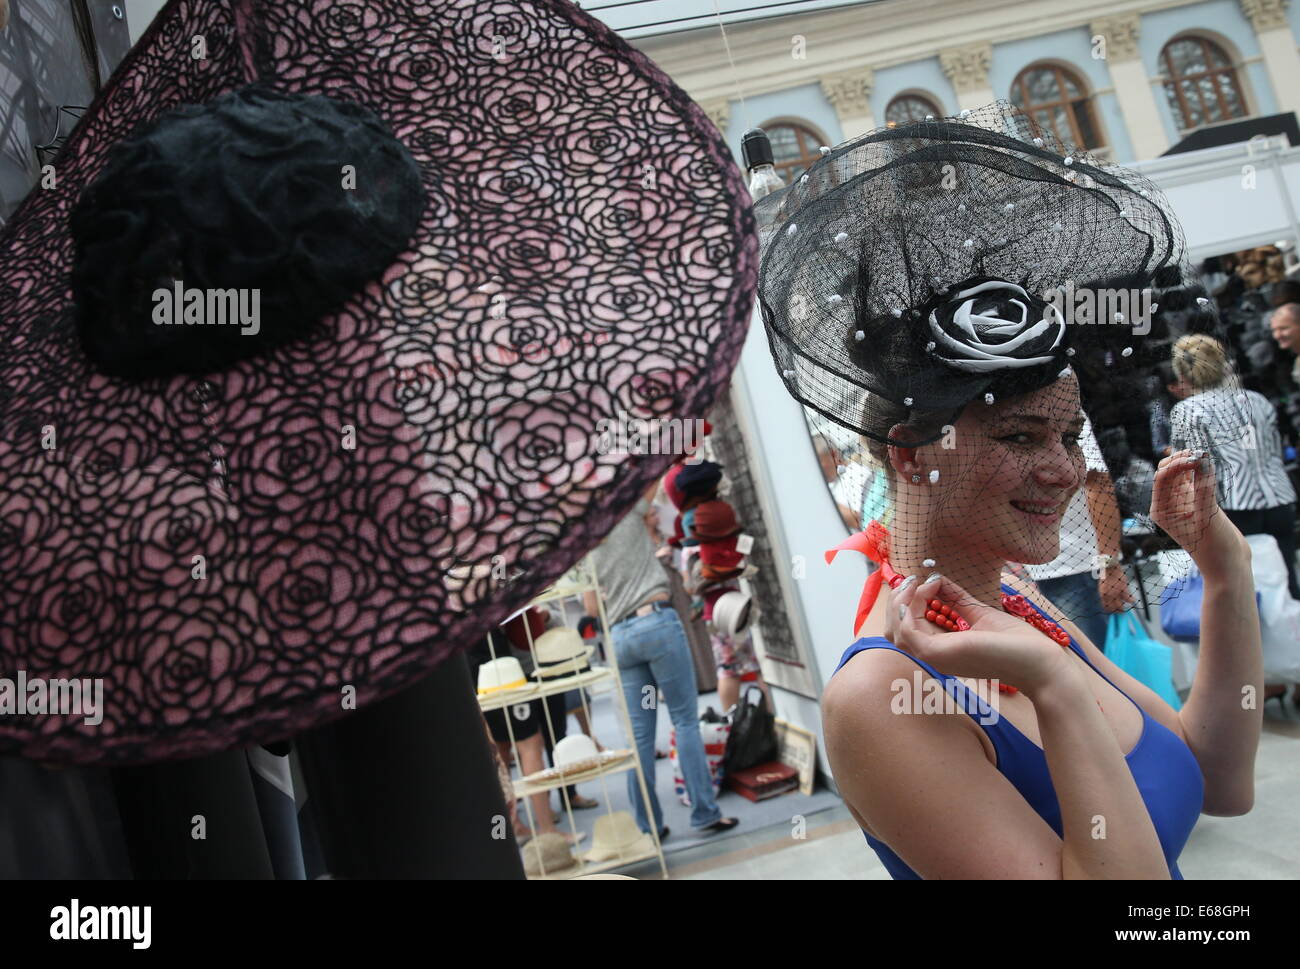 Moscow, Russia. 18th Aug, 2014. A visitor at the 12th International Specialized Exhibition of Headwear Raw Materials and Accessories "Chapeau 2014", at Moscow's Gostiny Dvor. Credit:  Vyacheslav Prokofyev/ITAR-TASS/Alamy Live News Stock Photo